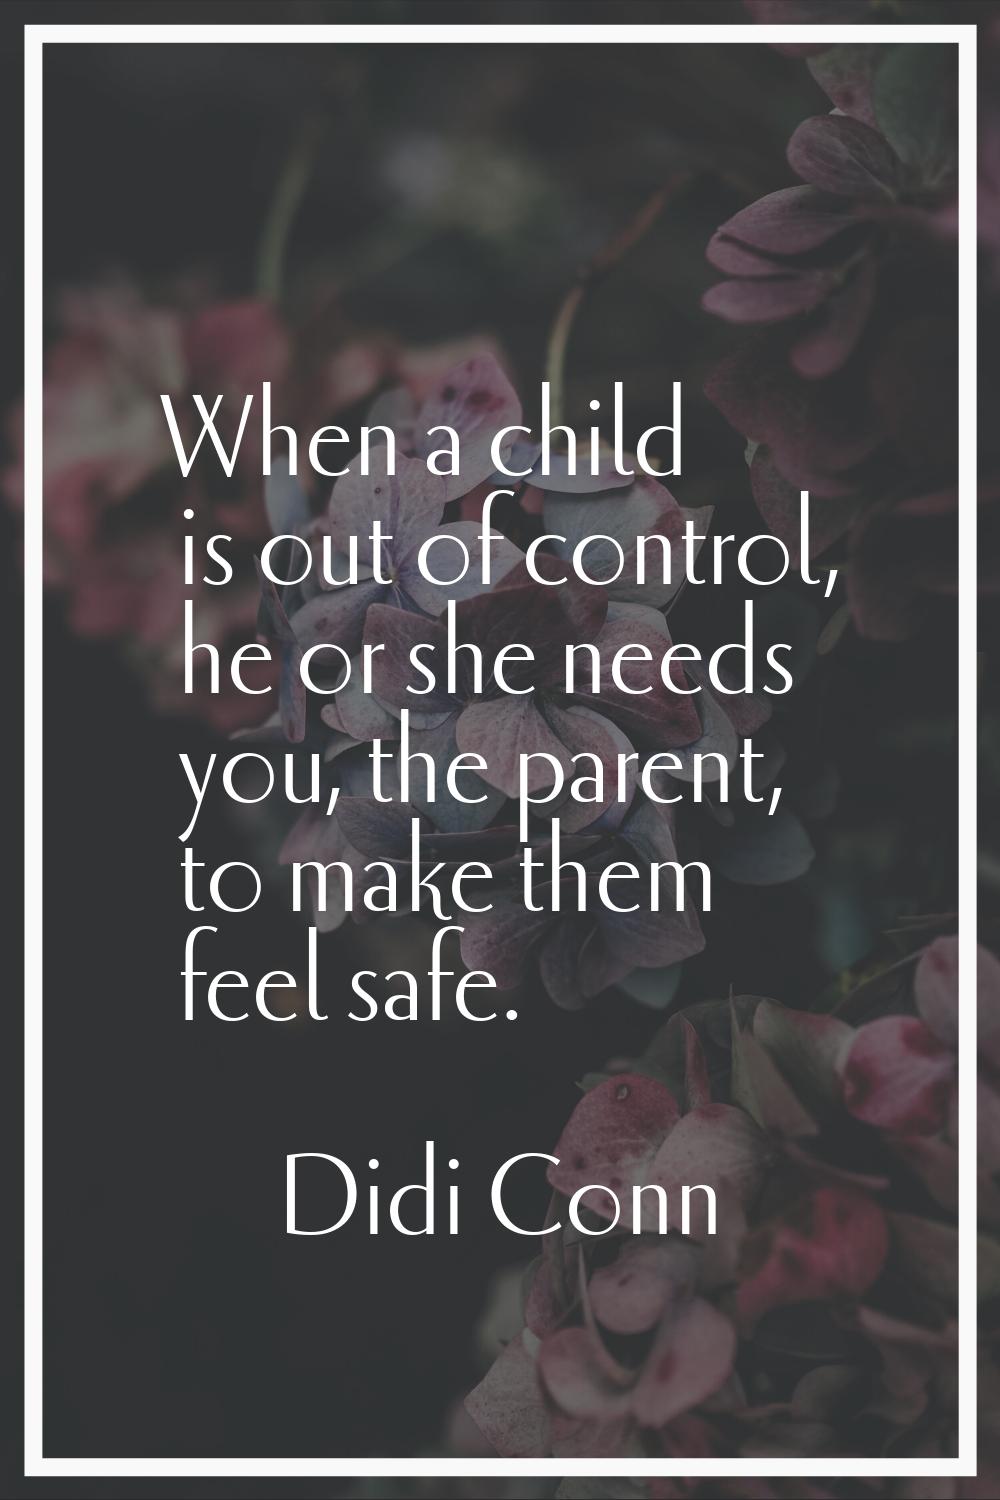 When a child is out of control, he or she needs you, the parent, to make them feel safe.